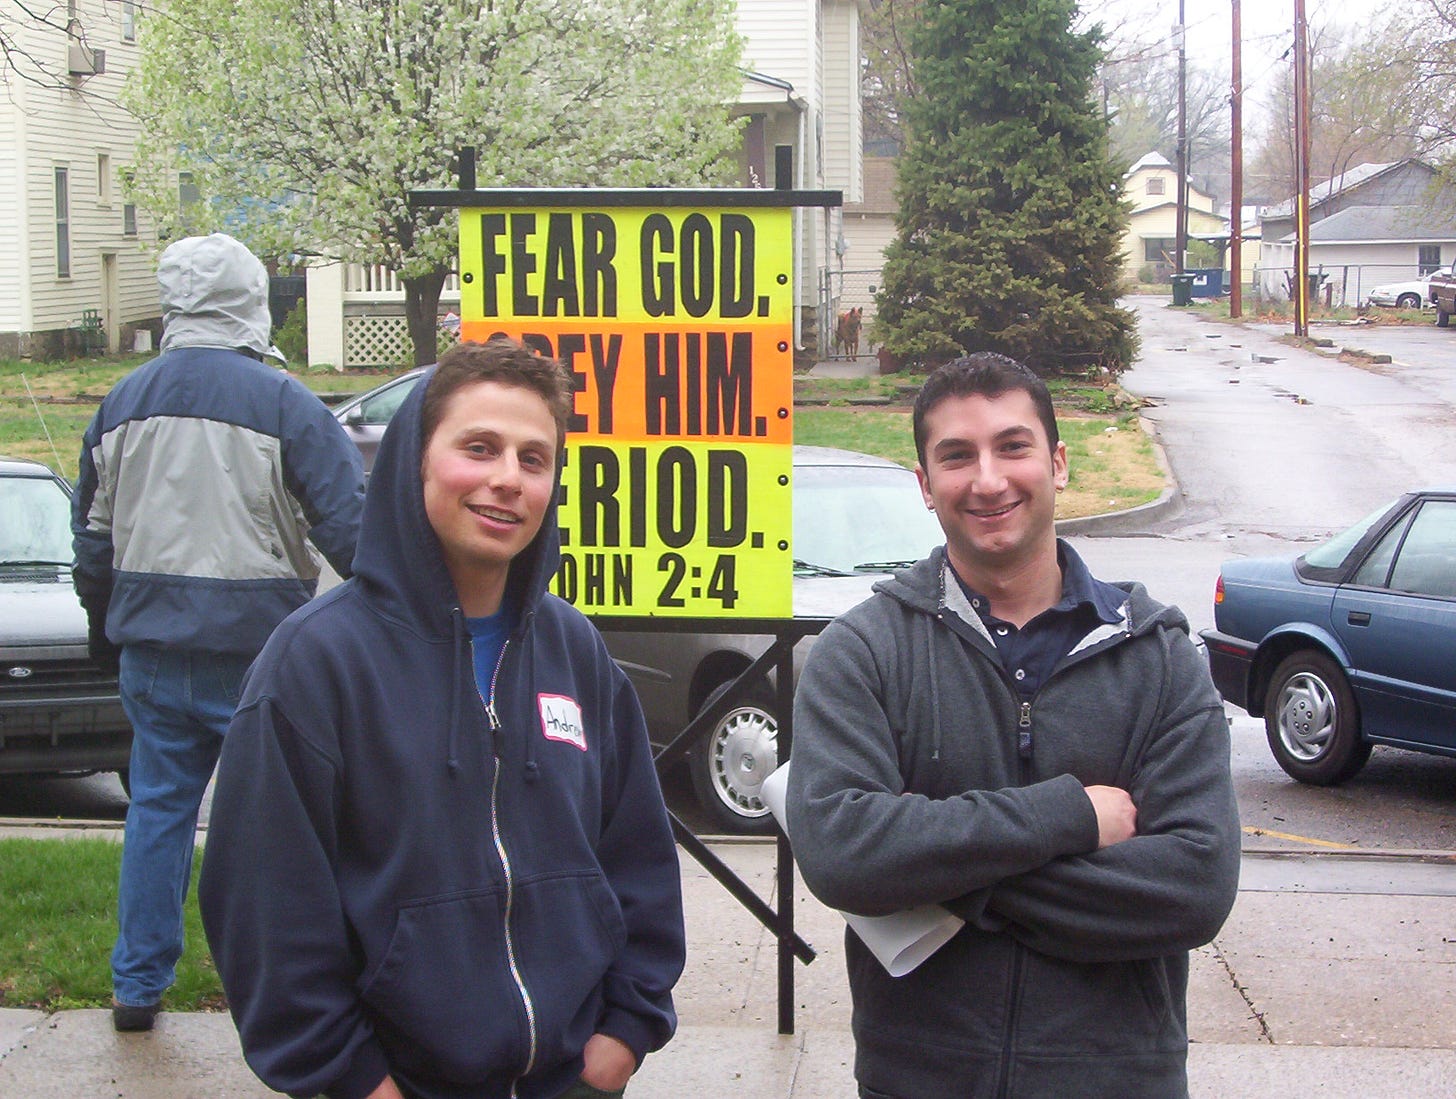 A group of men standing in front of a sign

Description automatically generated